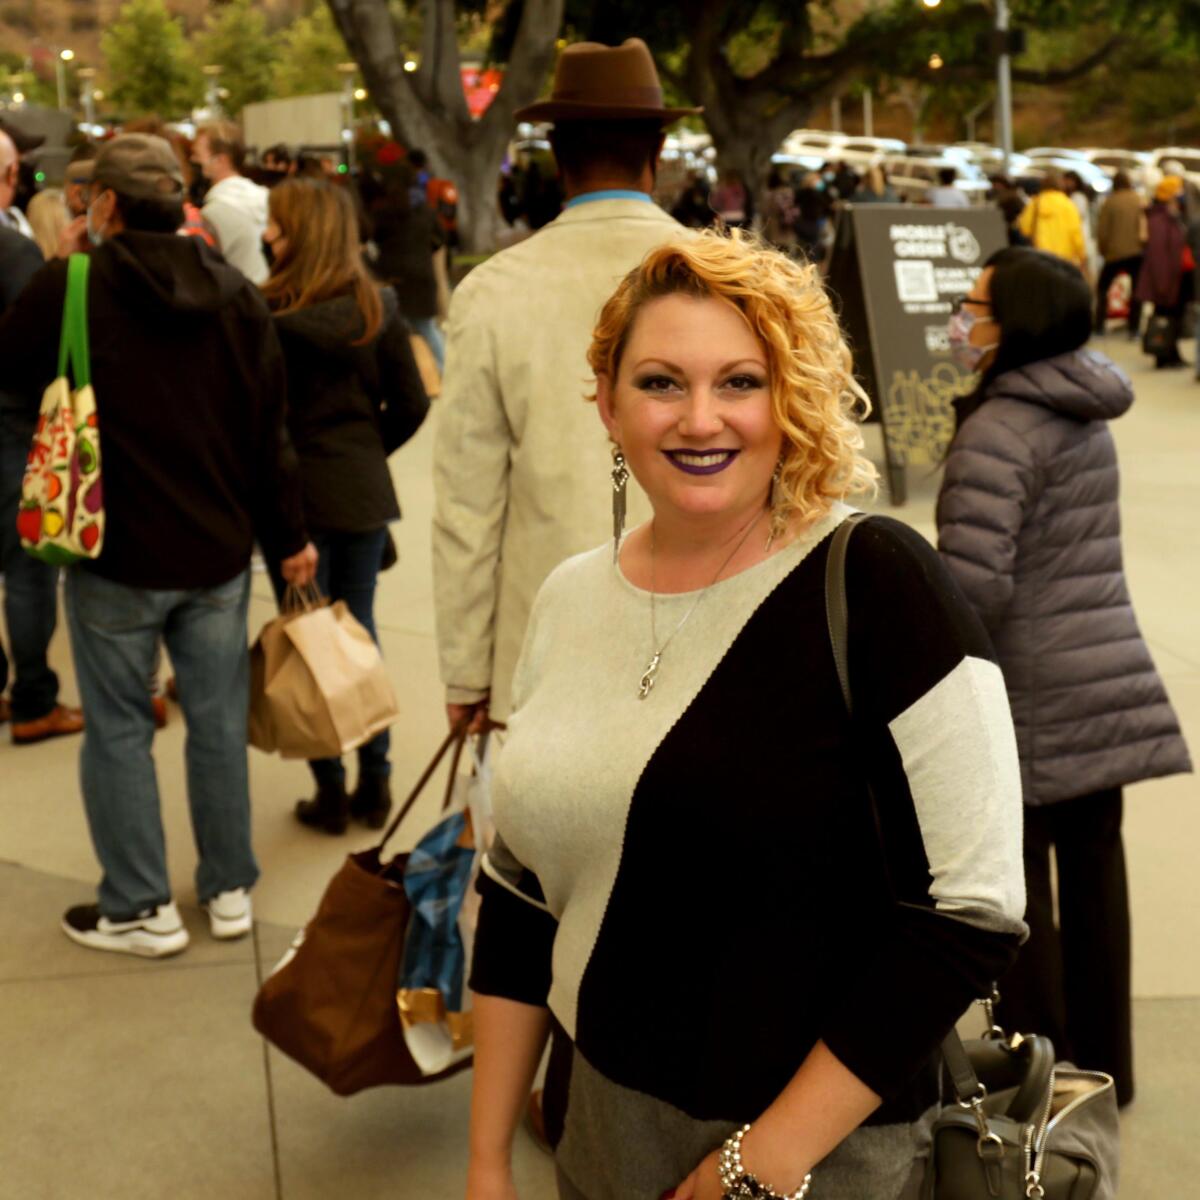 A woman poses for a photo, a line of people behind her.